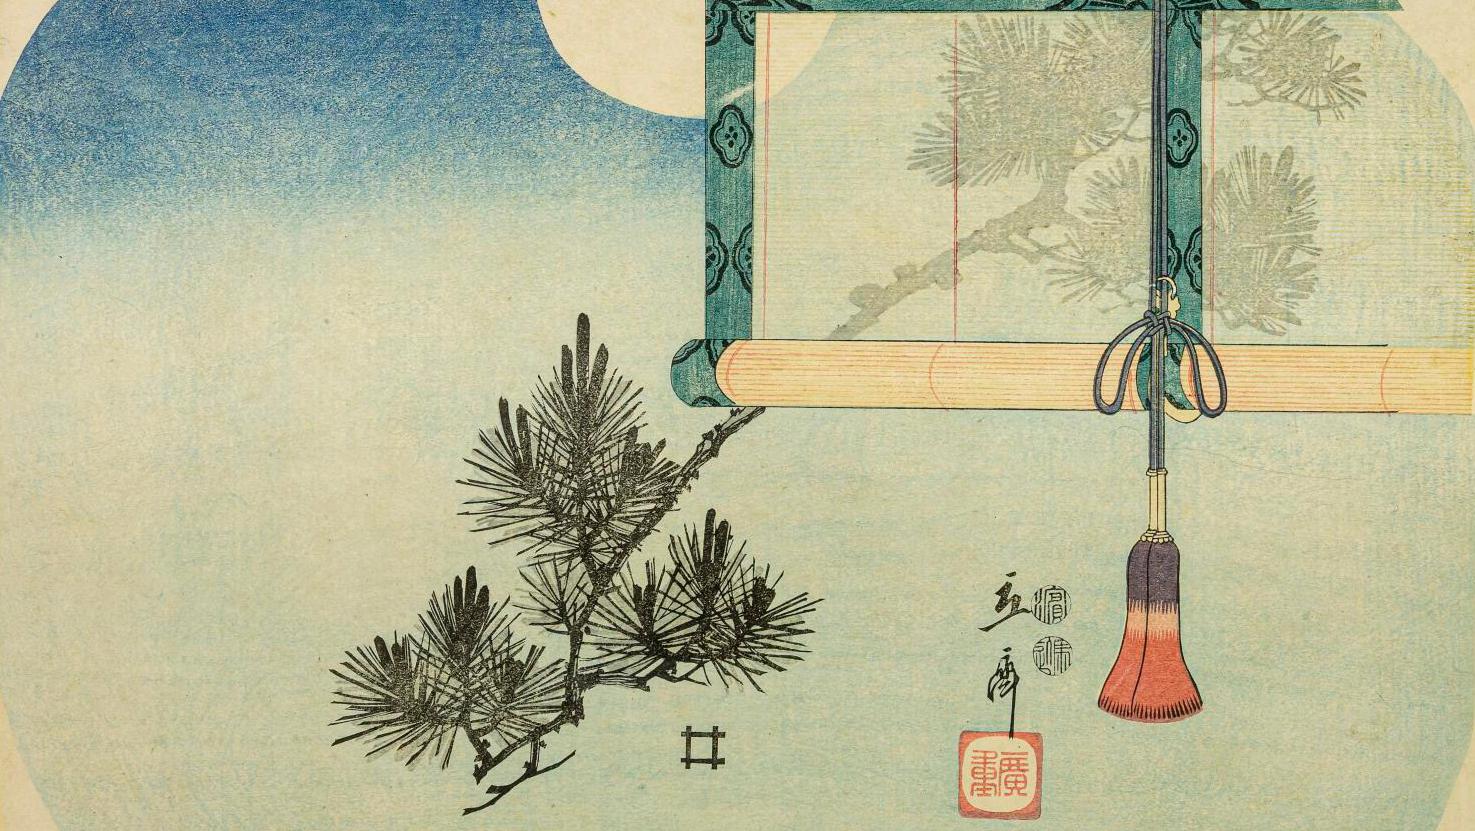 Utagawa Hiroshige (1797-1858), Untitled (Pine Tree Under a Full Moon, Through a Blind),... Hiroshige's Fans at the Guimet Museum in Paris